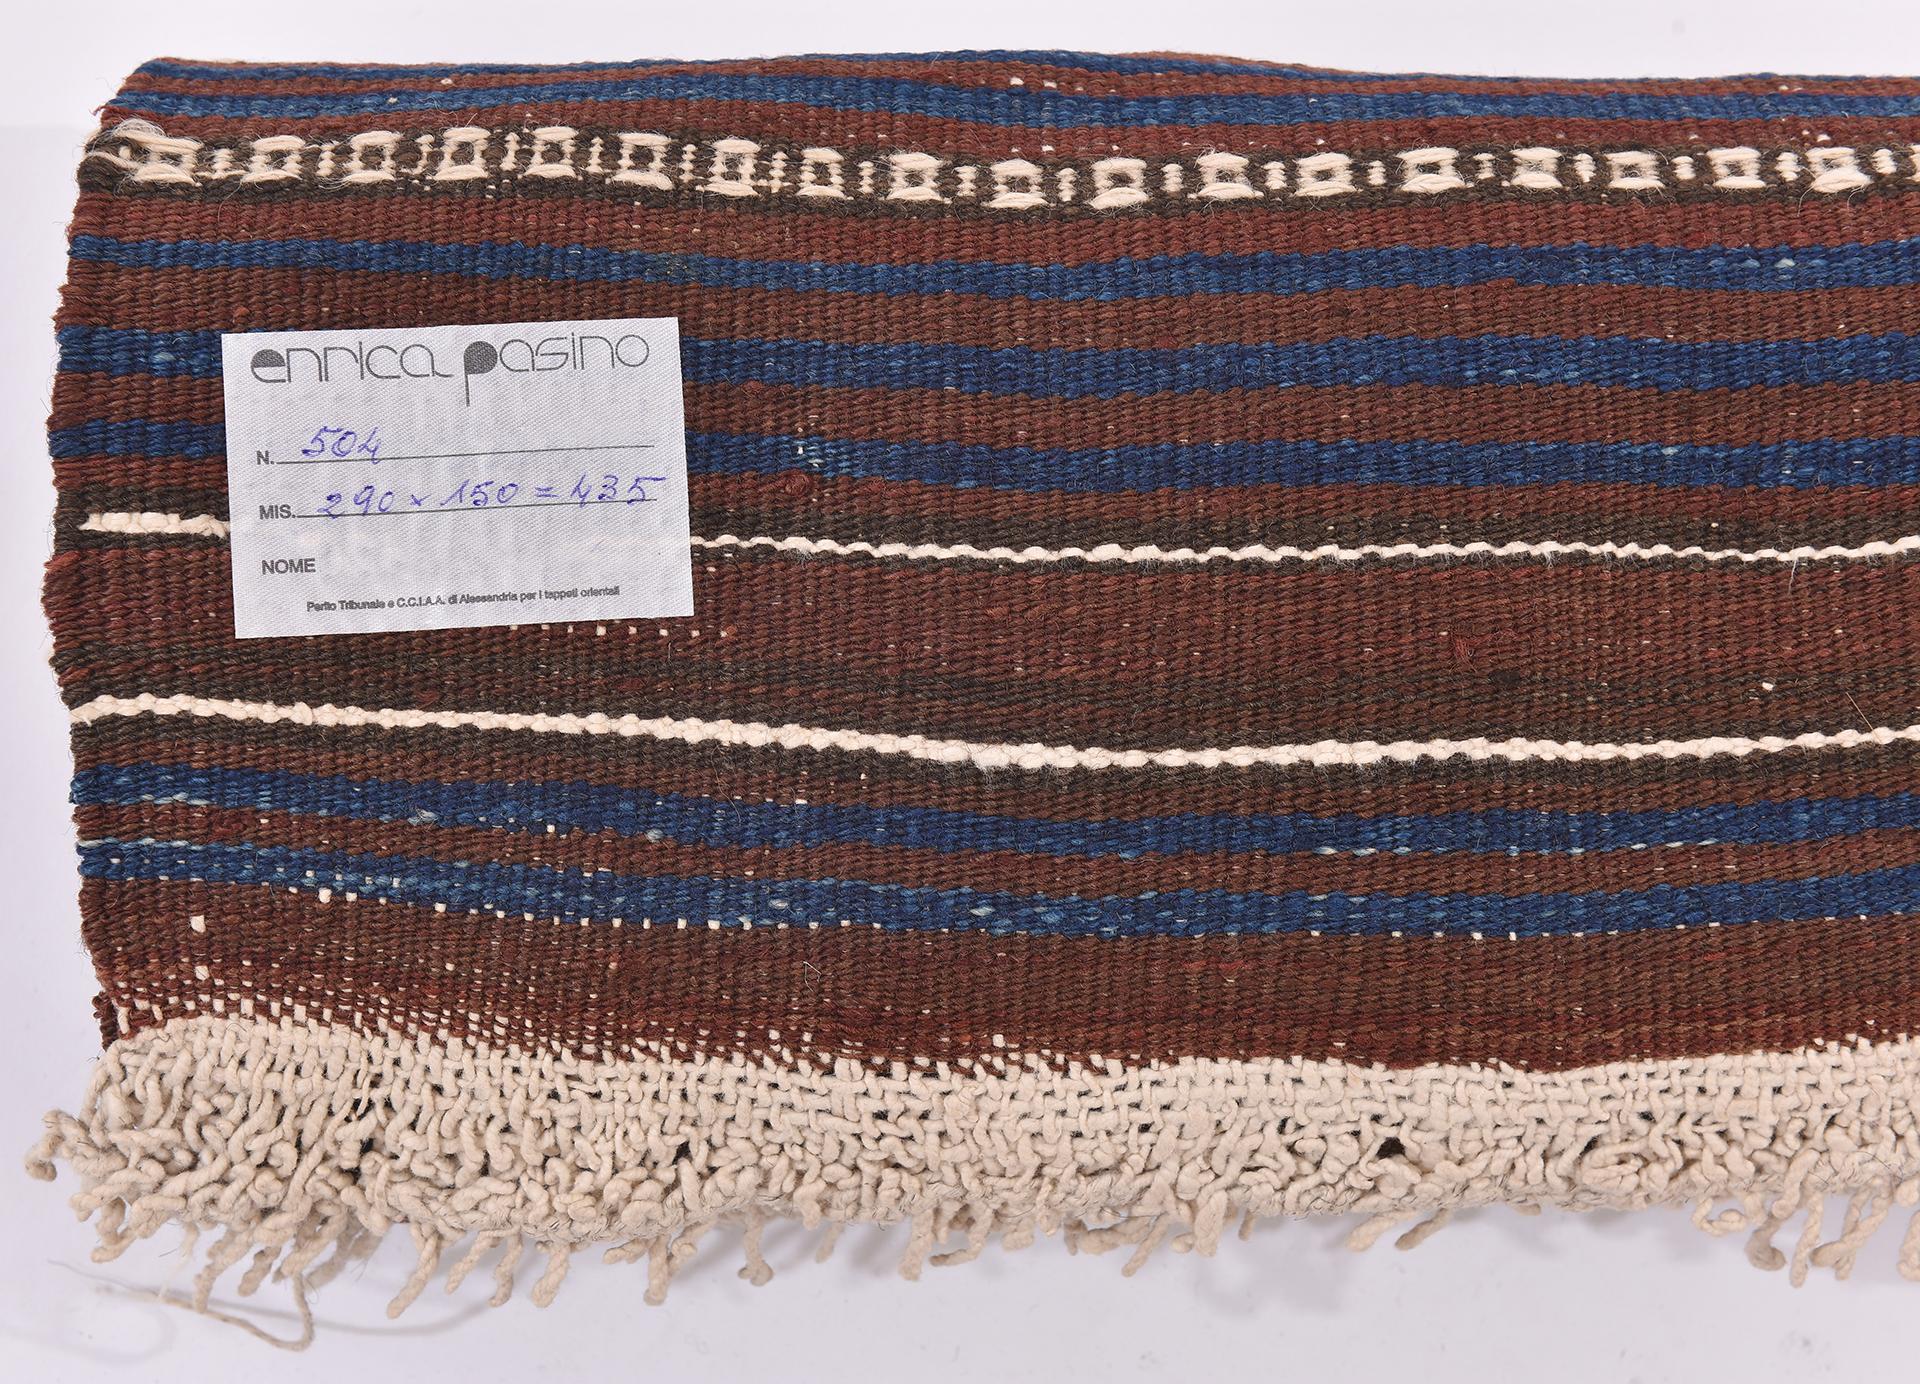 nr. 504 - Another example from my collection of nomadic kilims, now on sale for closing activities.
Thin blue and white lines on a brown background; sober and almost severe, but softened by white embroidered stripes.  Very particular.  Excellent